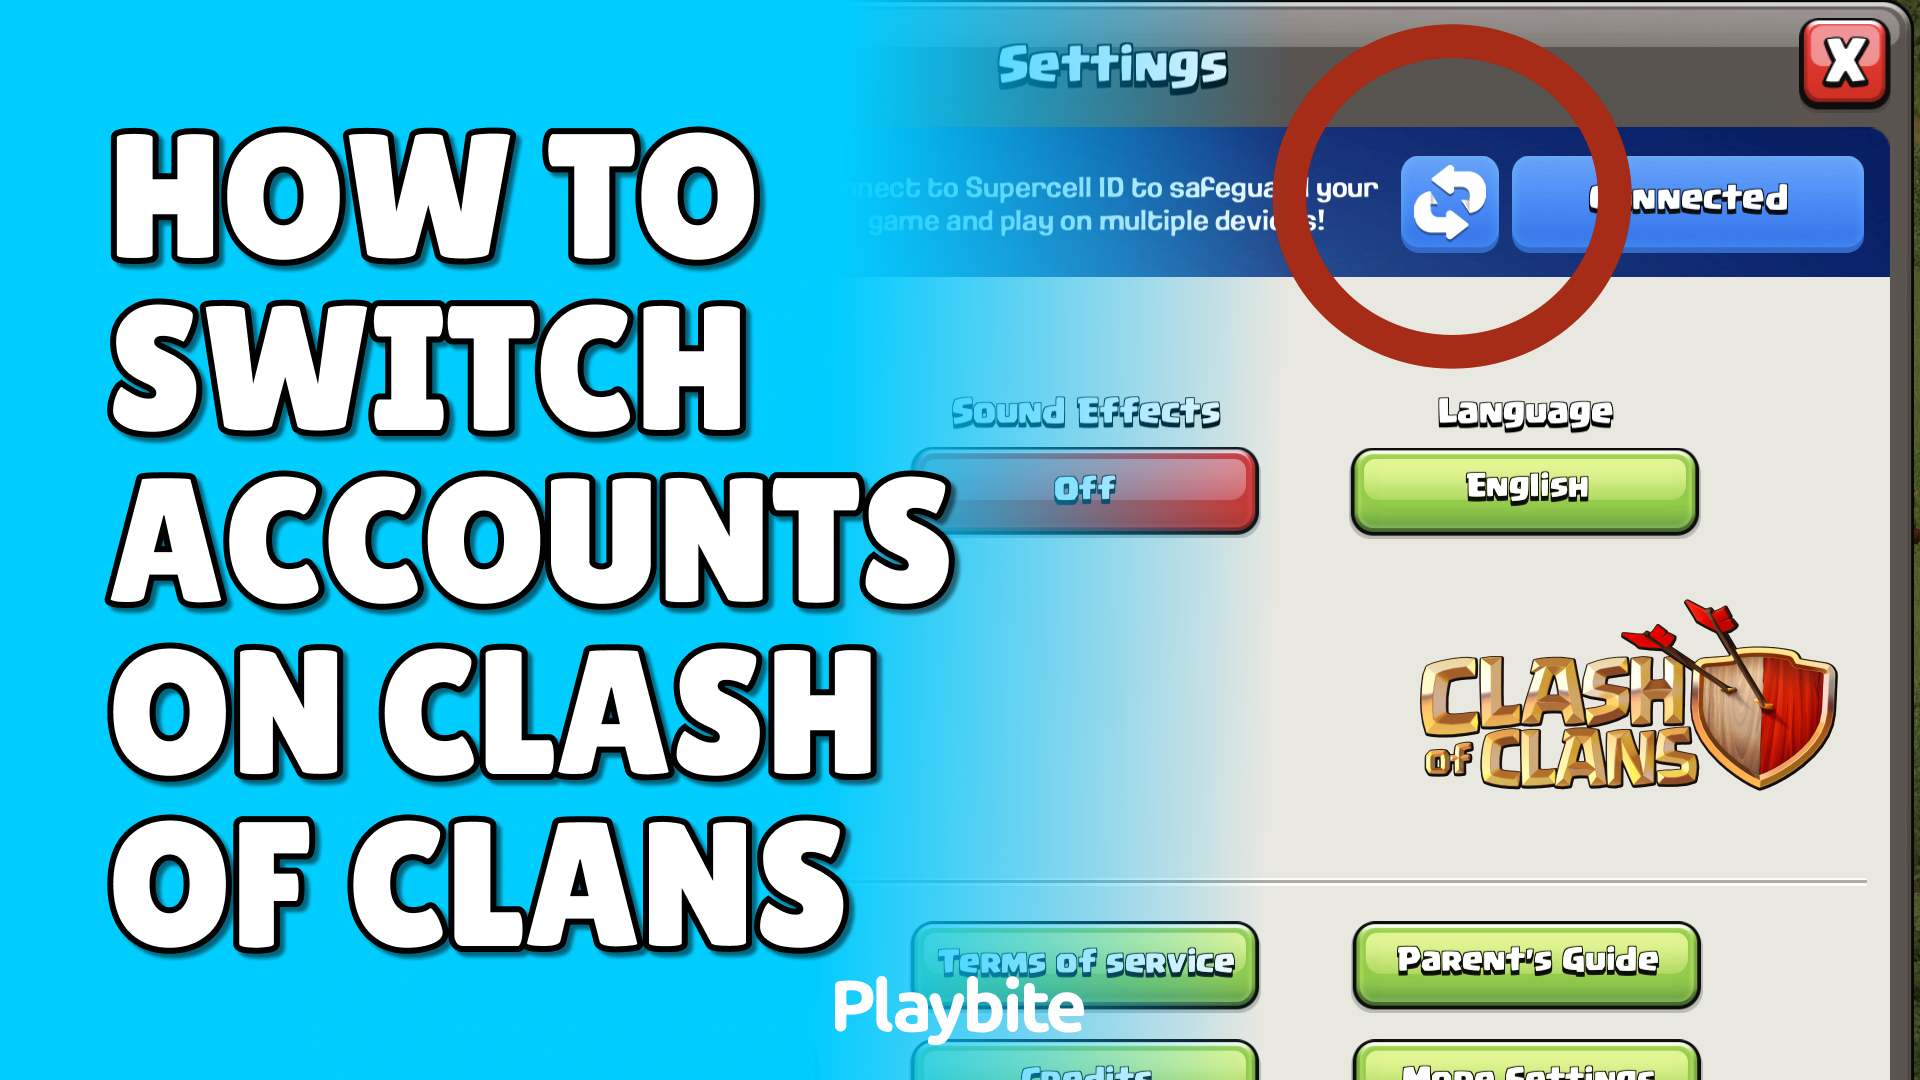 How To Switch Accounts On Clash Of Clans